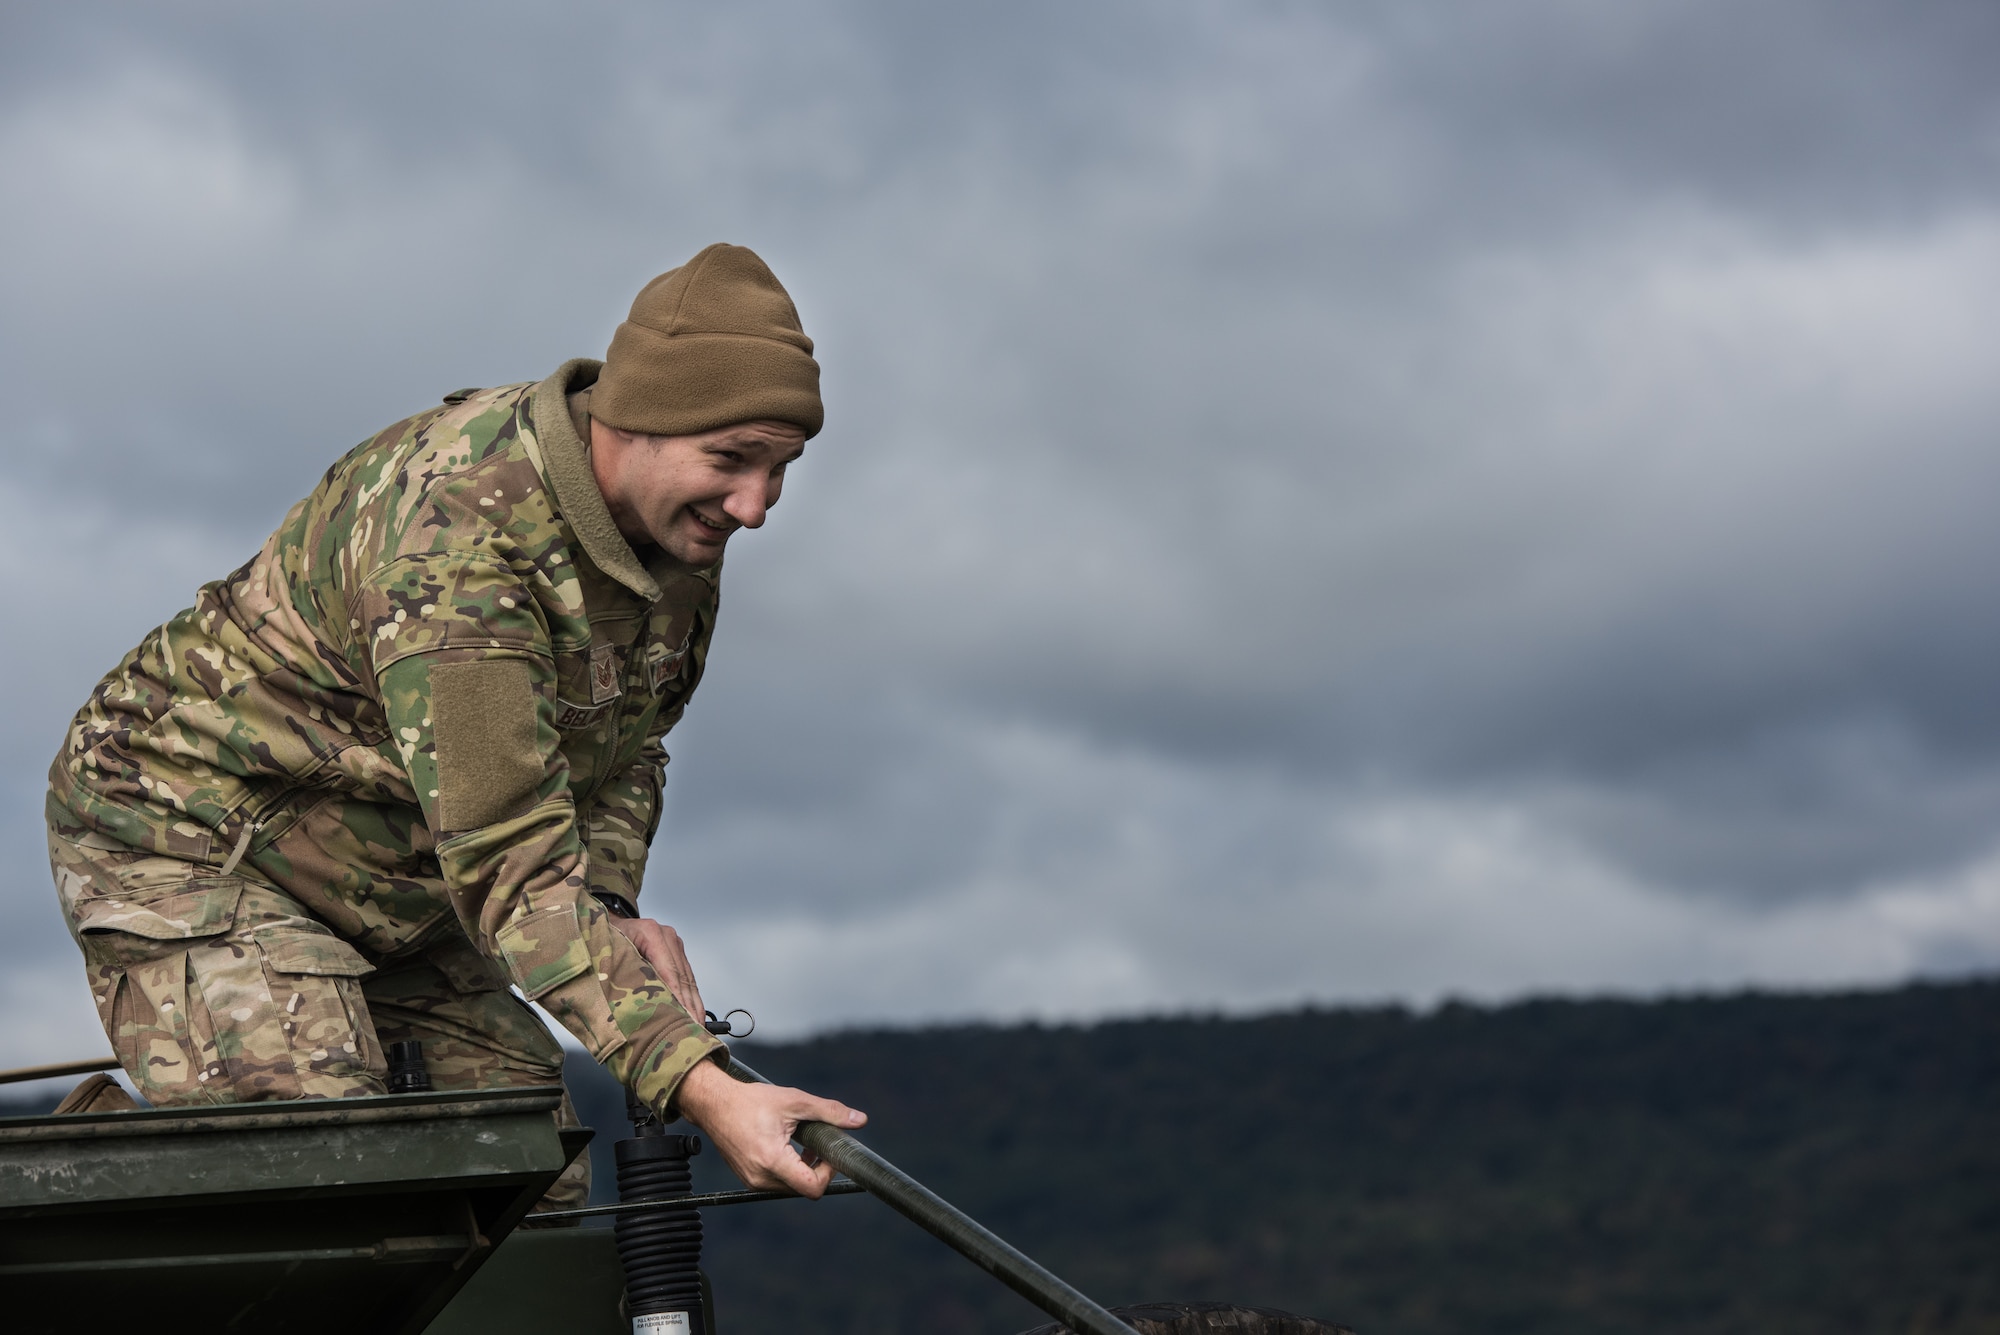 Tech. Sgt. Nathan Belanger, a radio frequency transmission systems supervisor with the 148th Air Support Operations Squadron, Pennsylvania Air National Guard, helps raise a whip antenna on a Humvee.